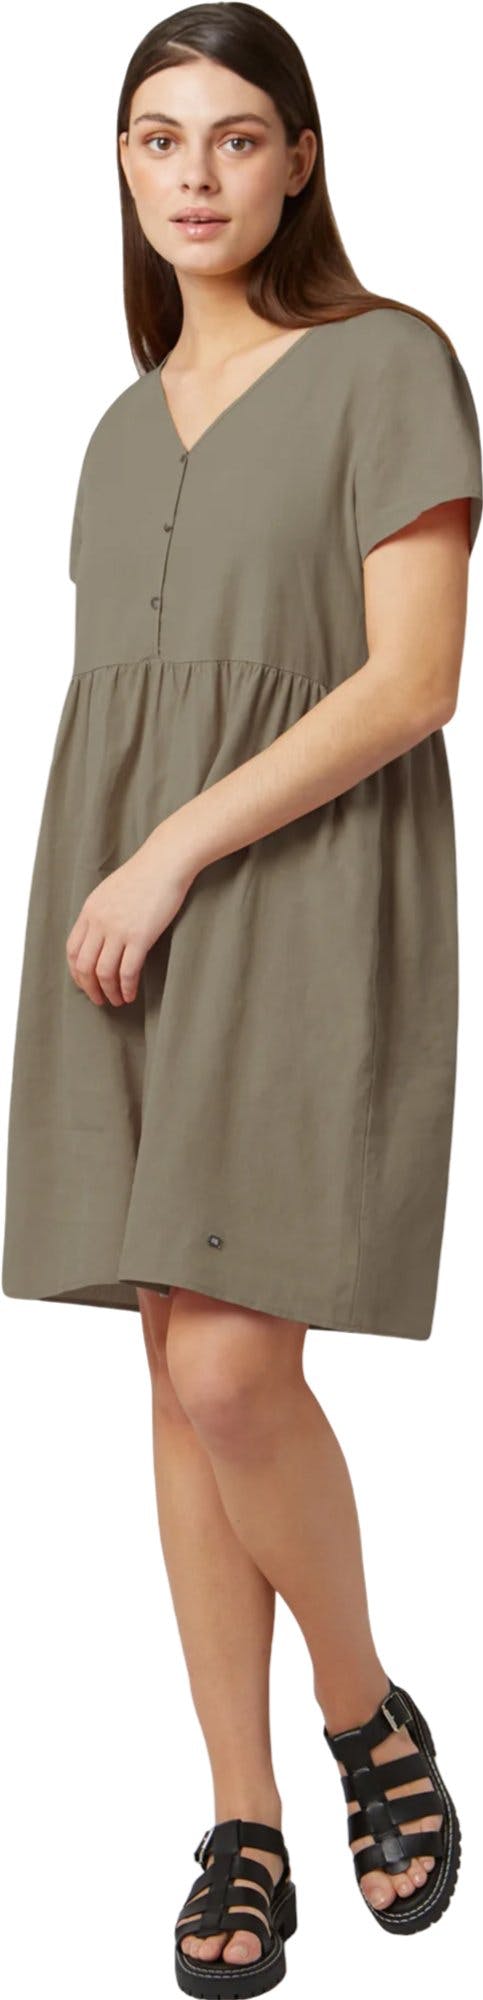 Product image for Acadia Dress - Women's